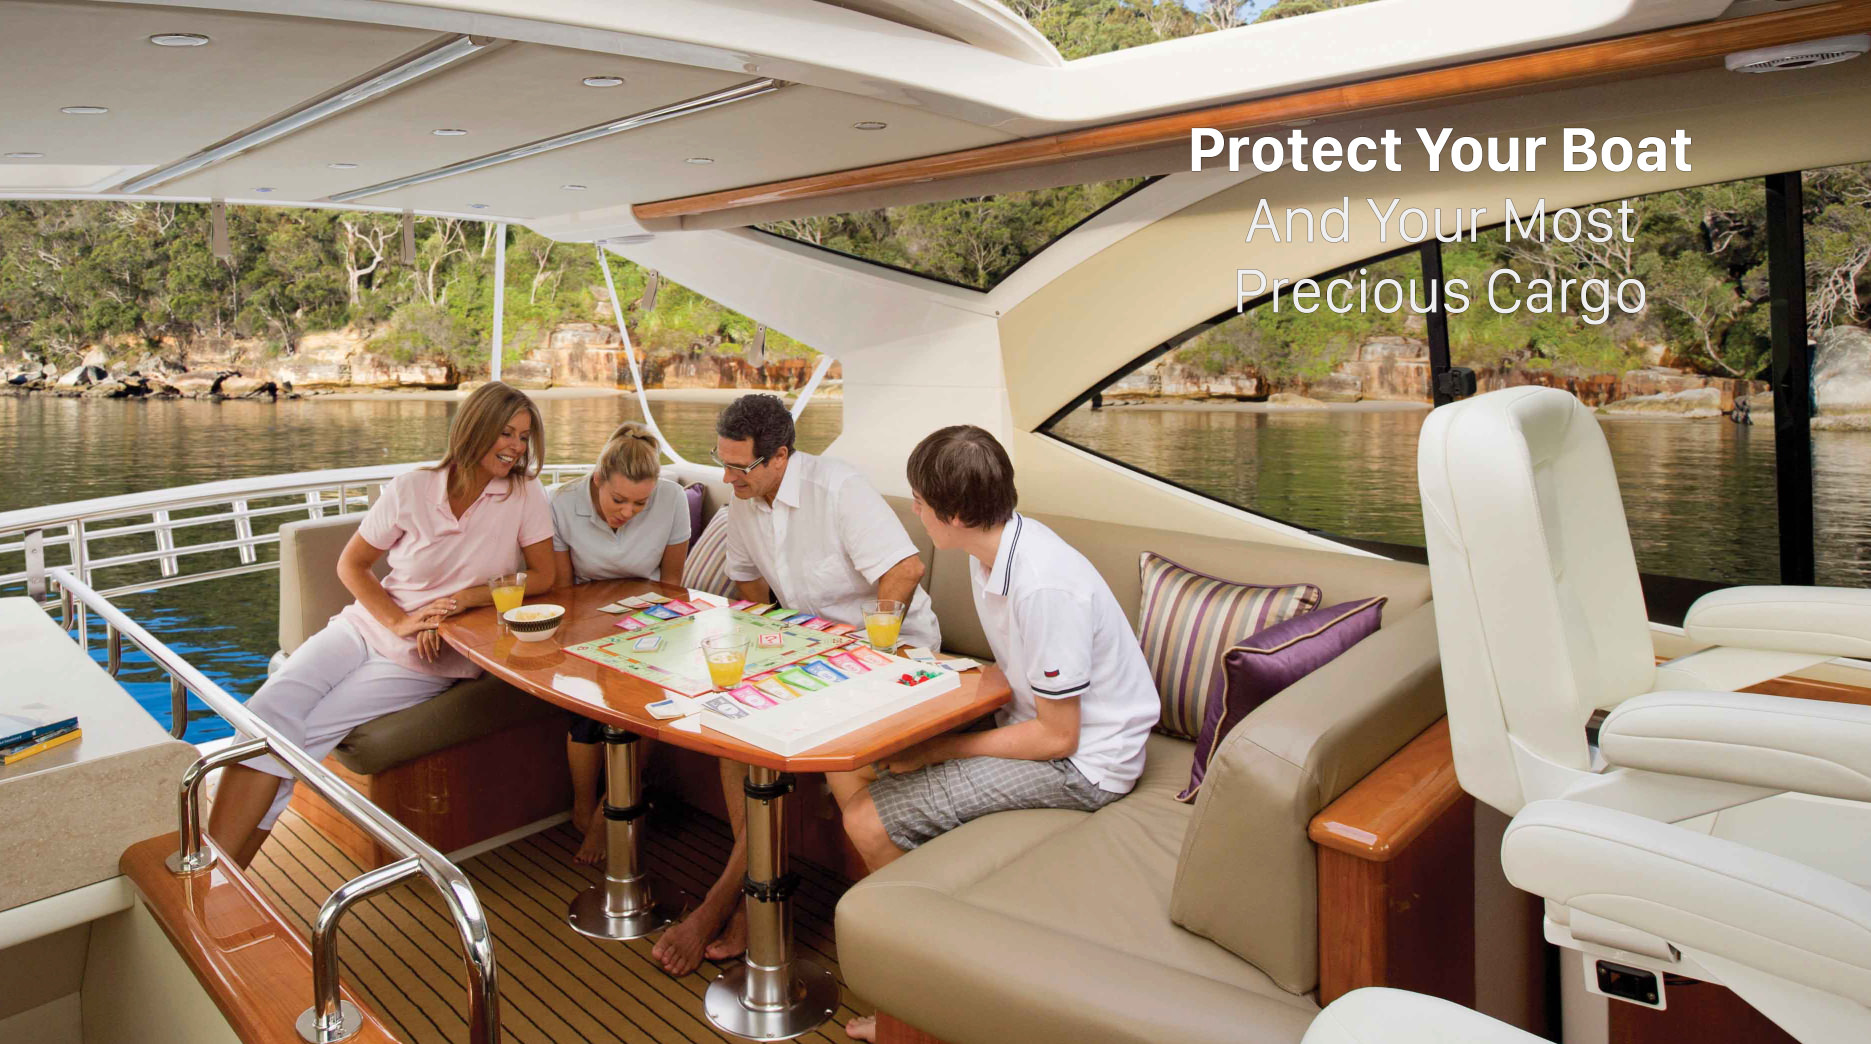 Protect Your Boat